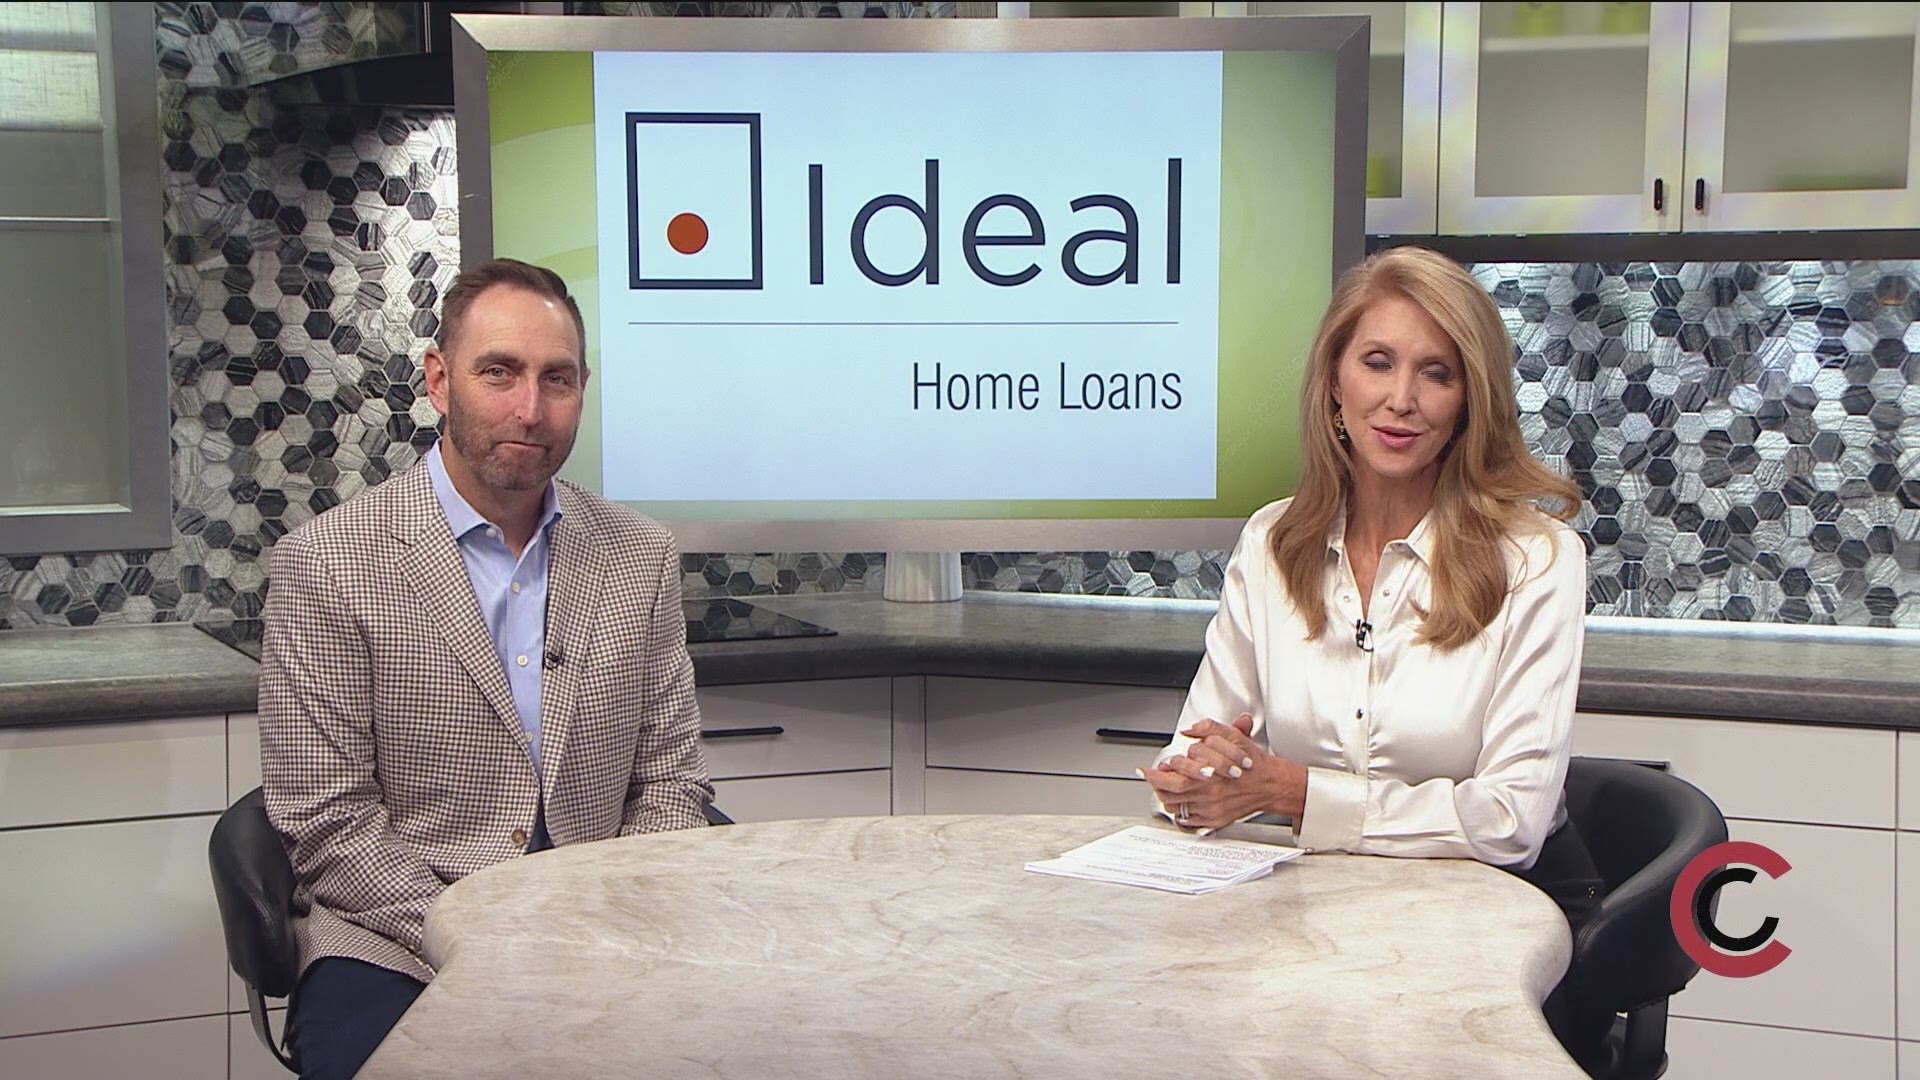 Take advantage of Ideal Home Loans’ free home mortgage consultation. Call 303.867.7000 or visit IdealHomeLoans.com to get started.